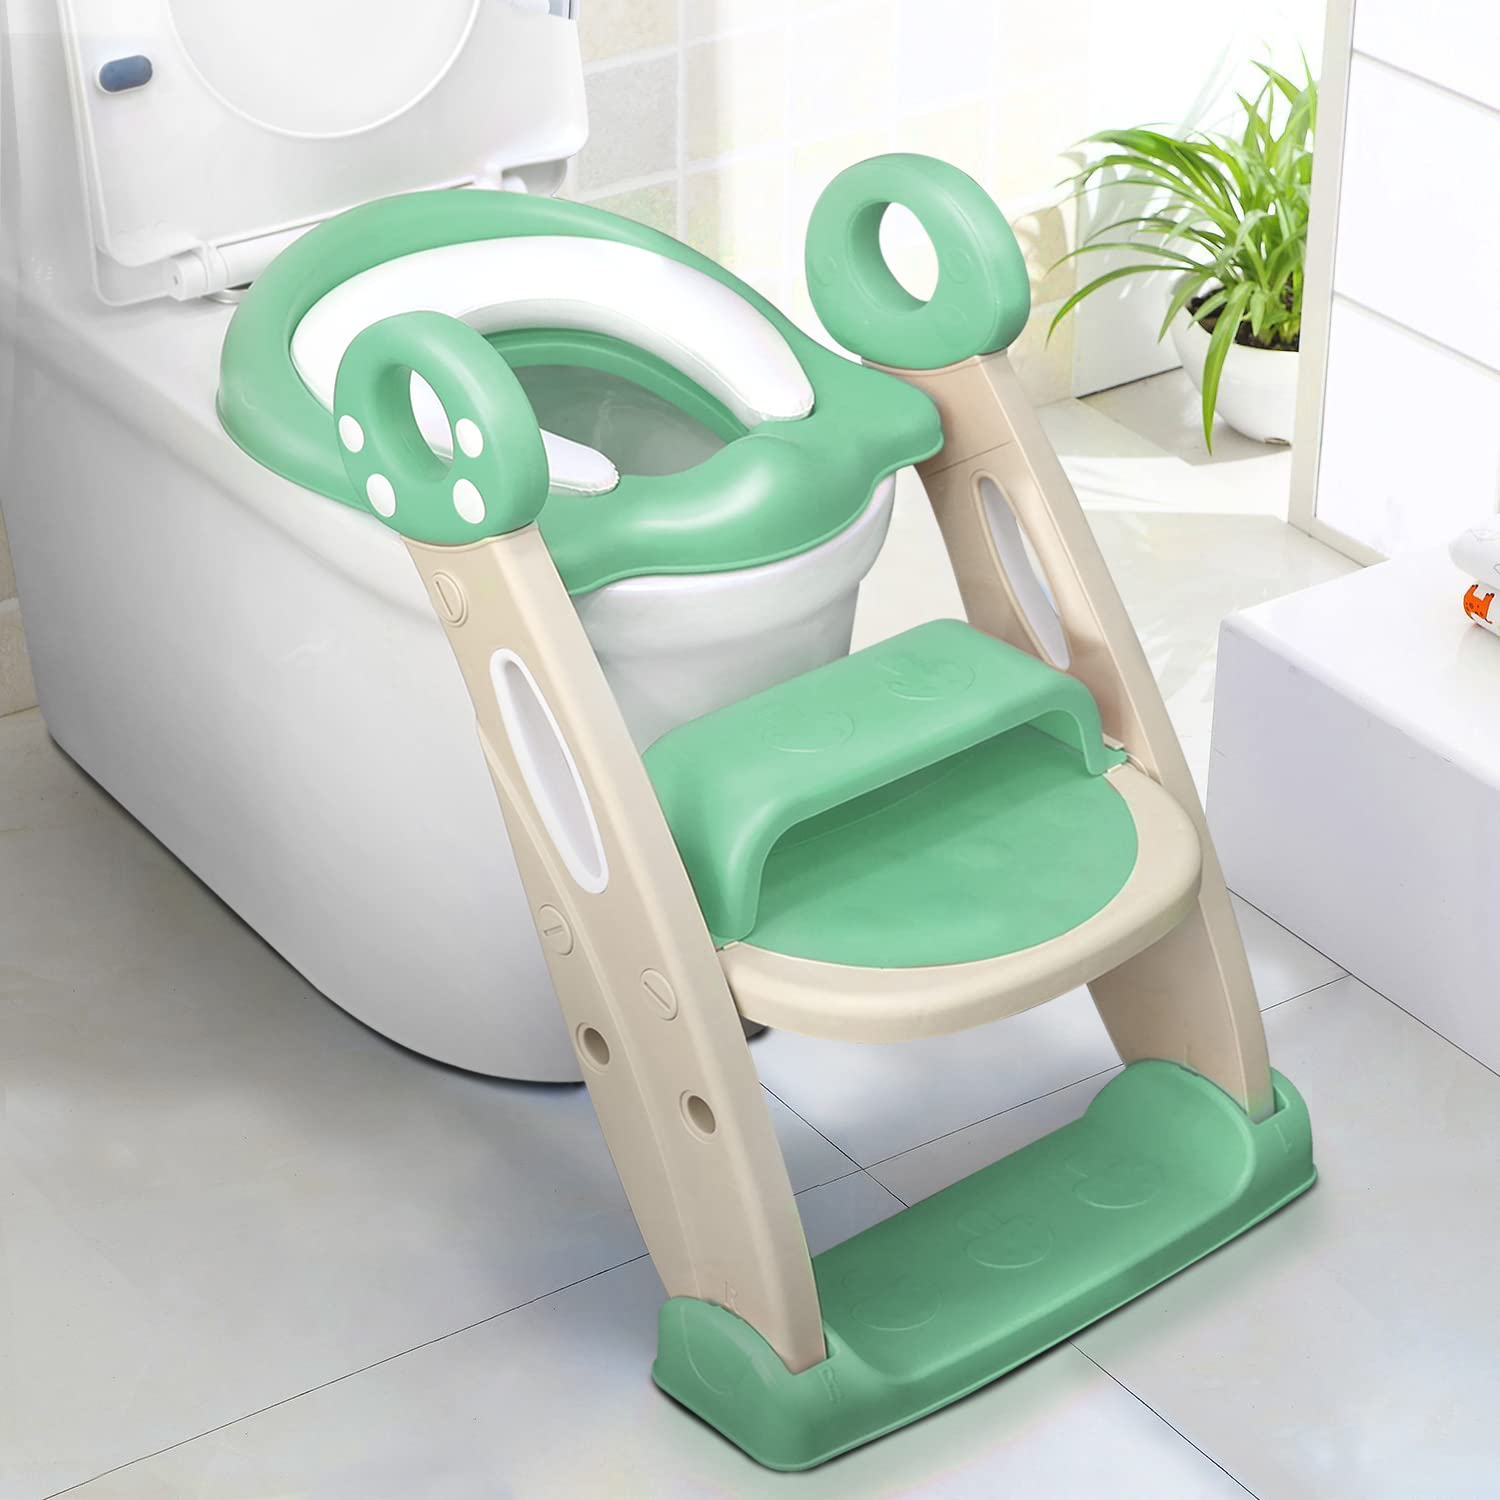 KIDOOLA Adjustable Toilet Pad Seat – For Toddler Baby Kid Boy Girl – Foldable Potty Urinal Trainer – Stool with Step – Lightweight Portable Bathroom Ladder Chair with Grip Handlers (Green)